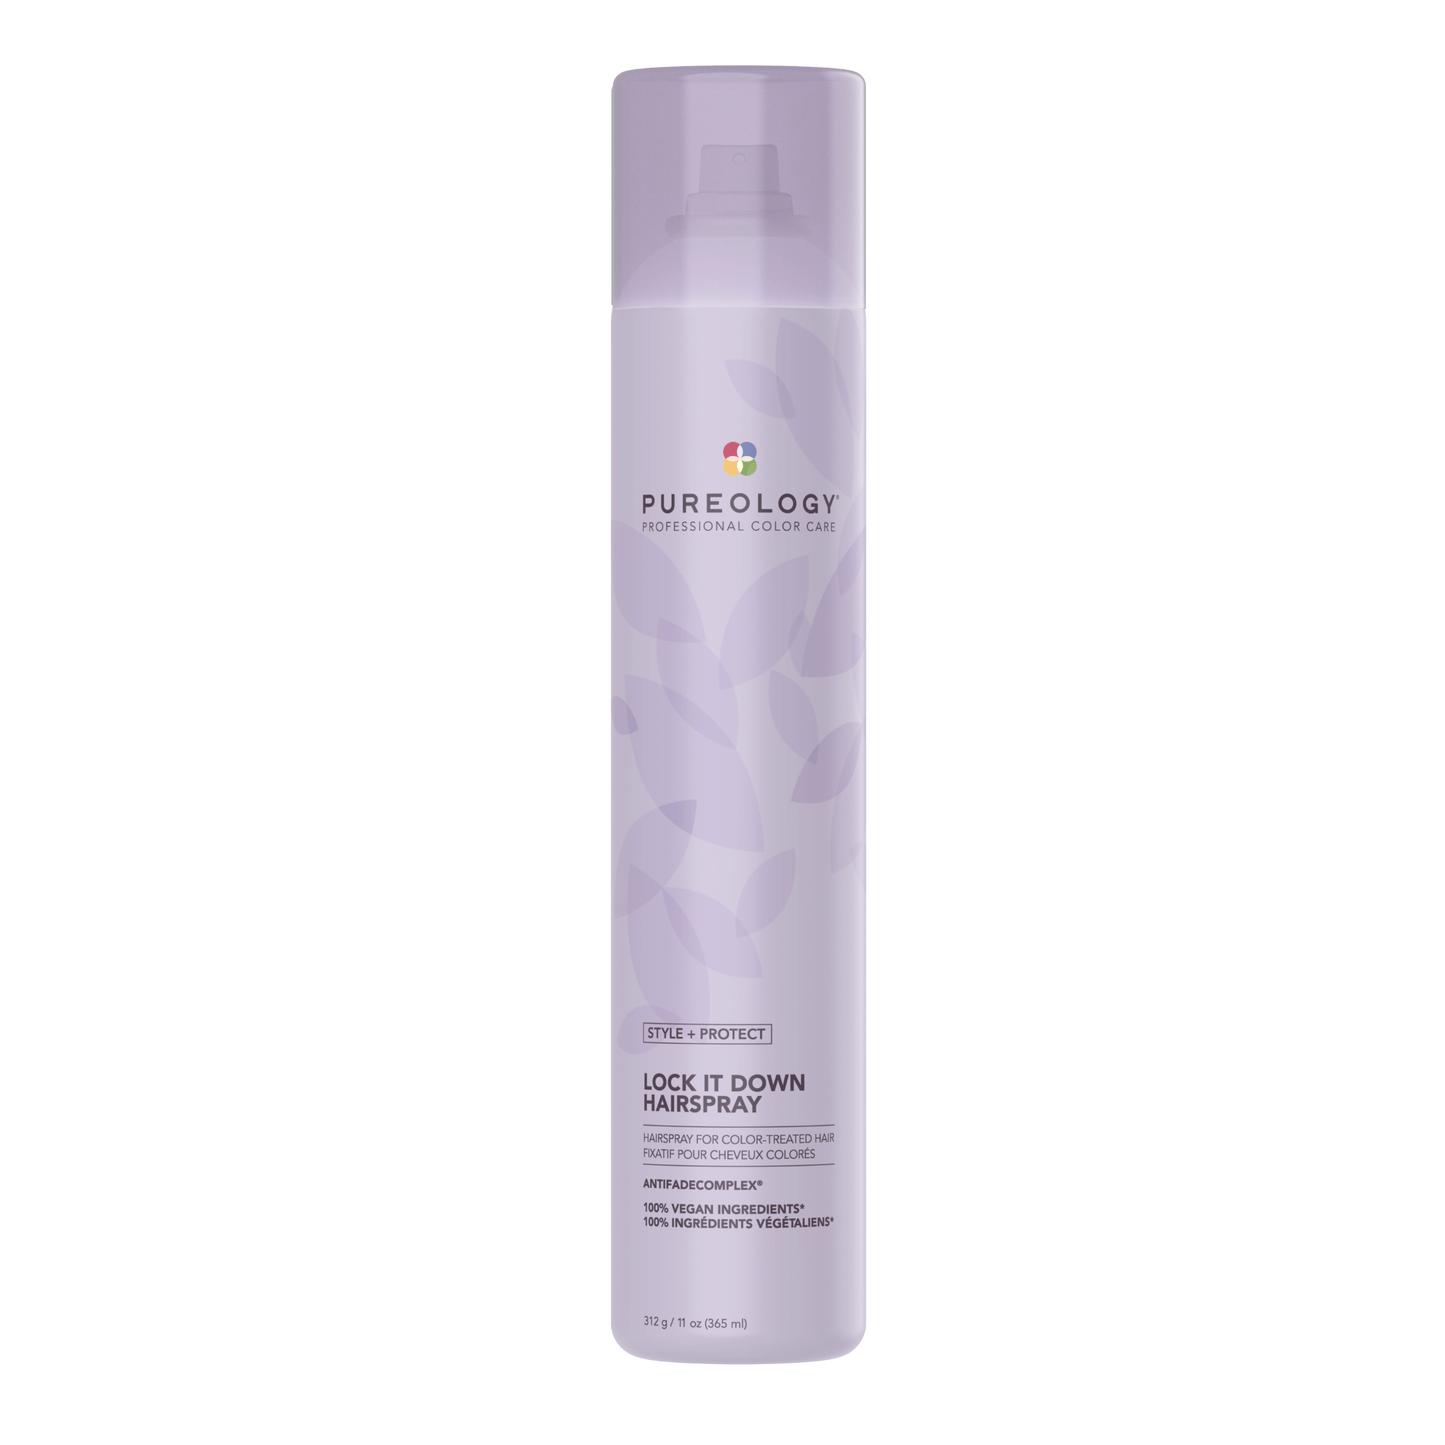 Pureology Style + Protect Lock It Down Hairspray 365ml